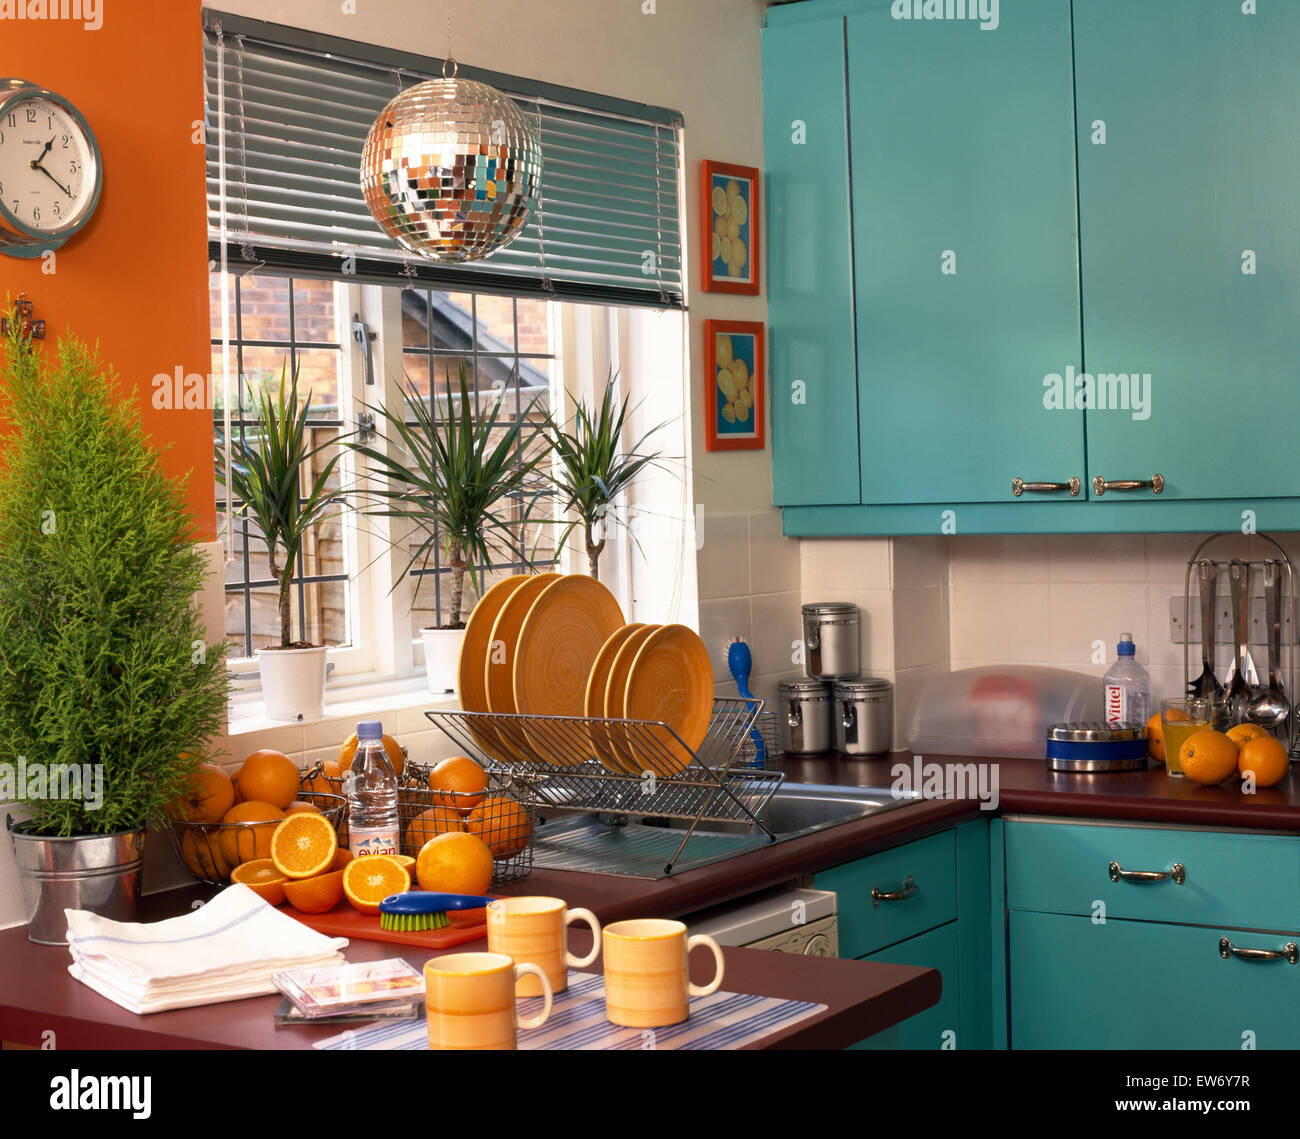 Yellow plates in draining rack beside sink in economy style kitchen with turquoise doors on fitted units Stock Photo